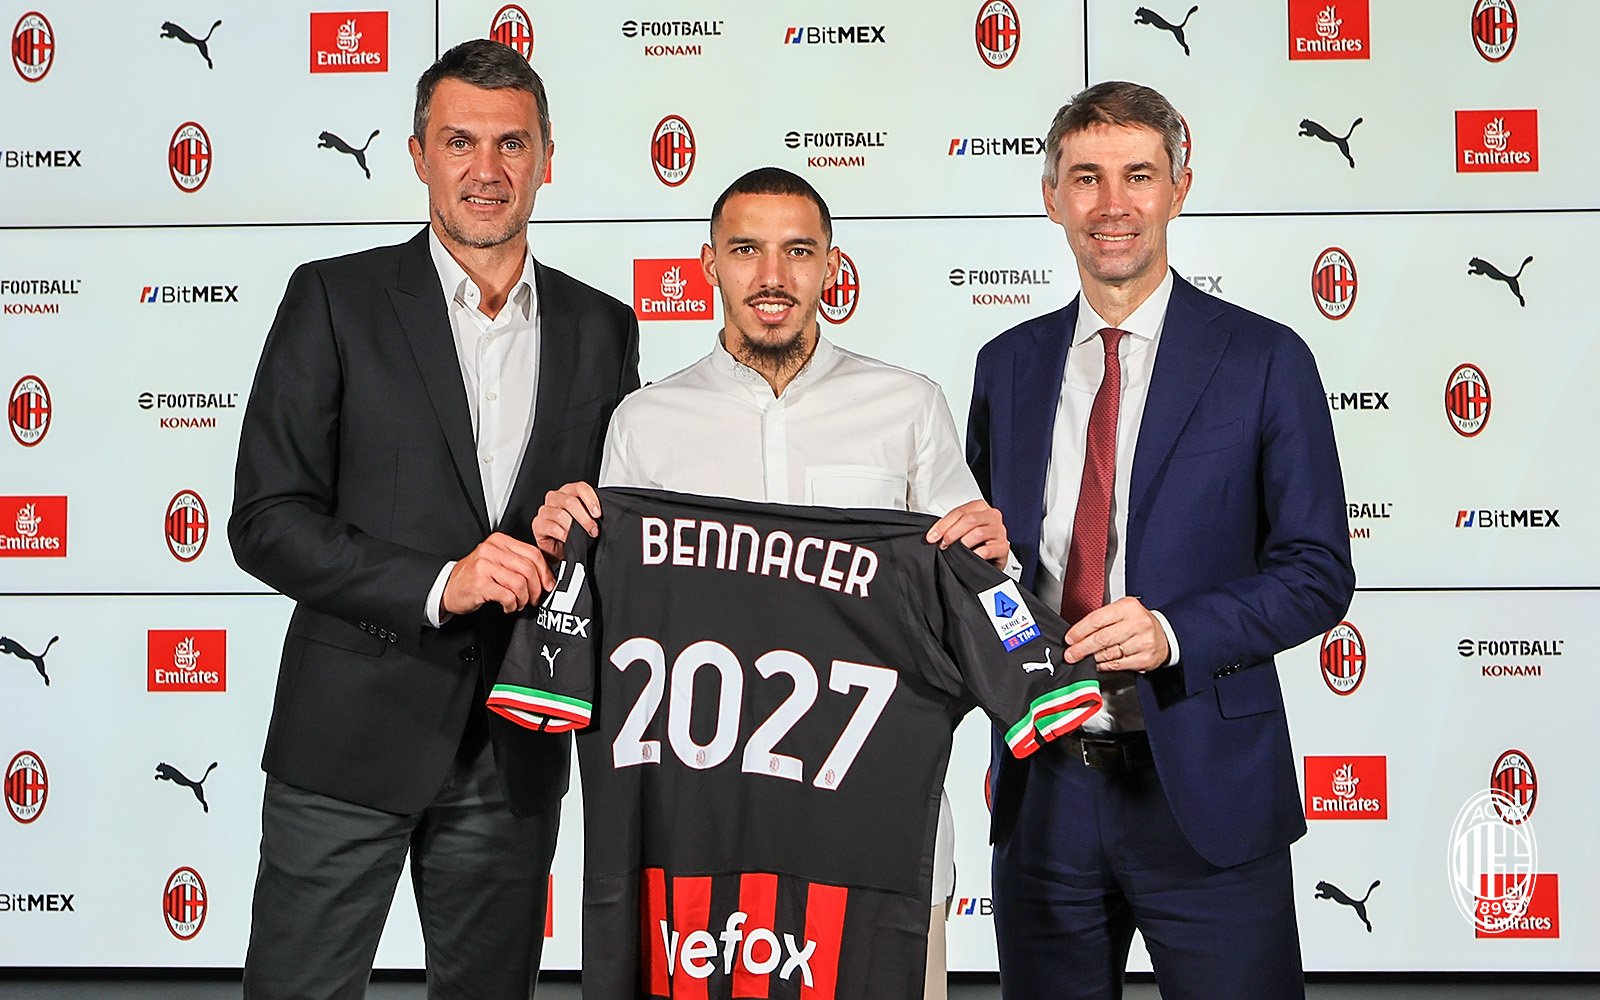 Bennacer extends contract with AC Milan until 2027